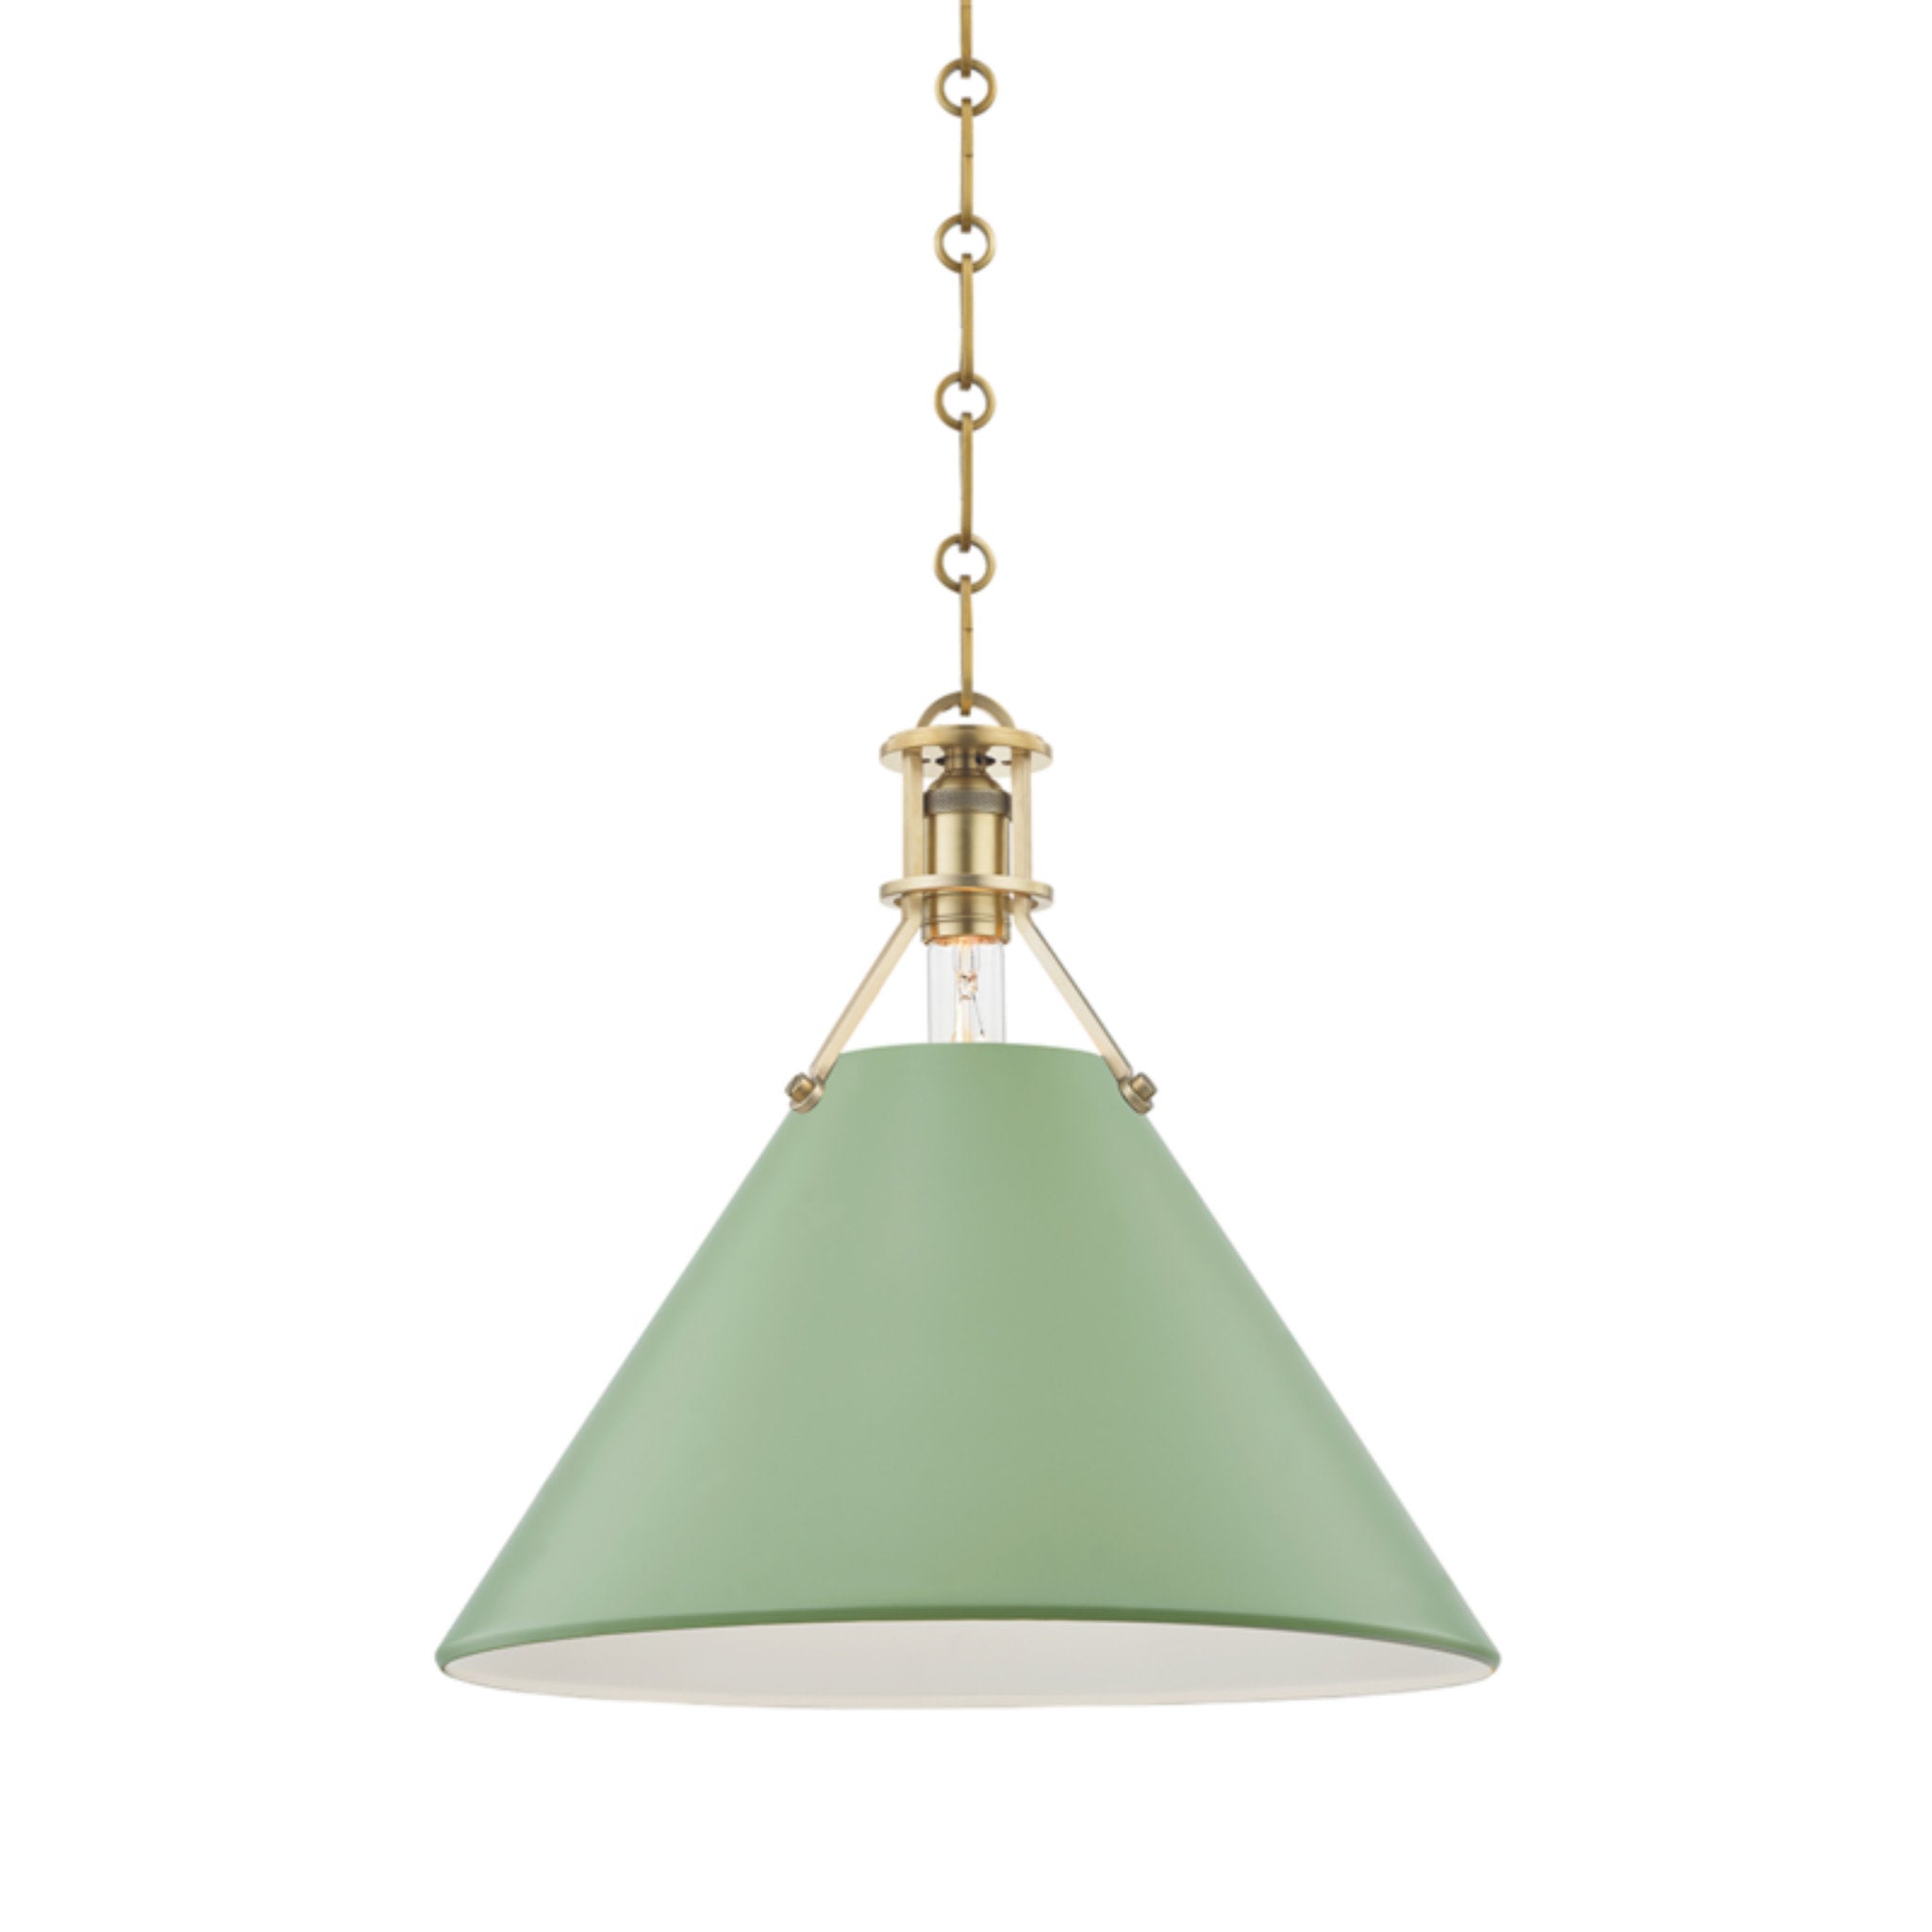 Painted No.2 1 Light Pendant in Aged Brass/leaf Green Combo by Mark D. Sikes